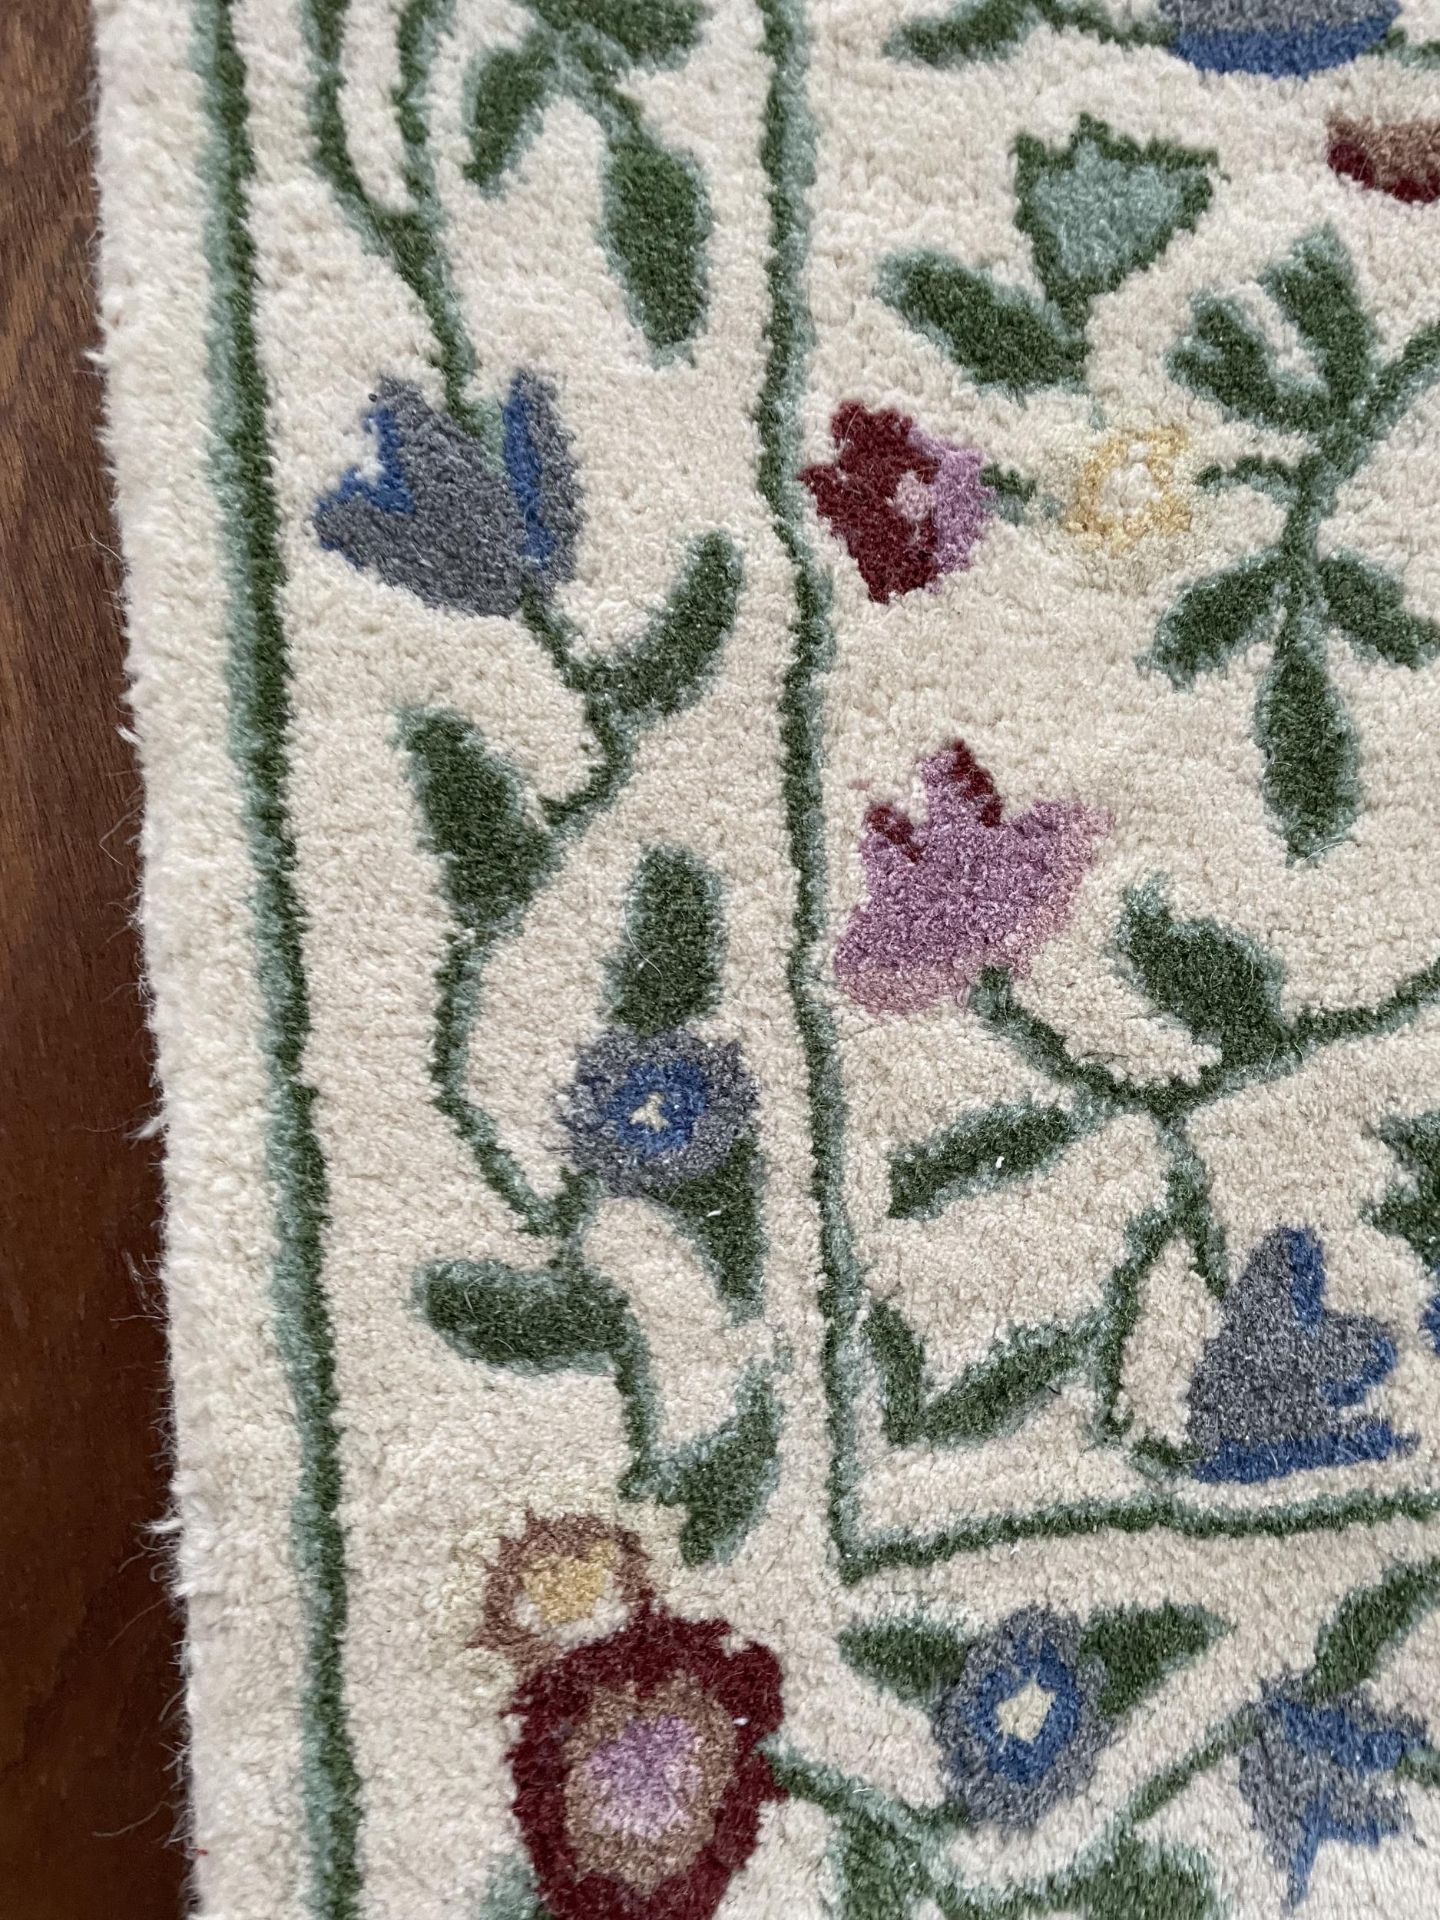 A WOOLEN FLORAL RUNNER APPROX 76 INCH X 27 INCH - Image 2 of 2